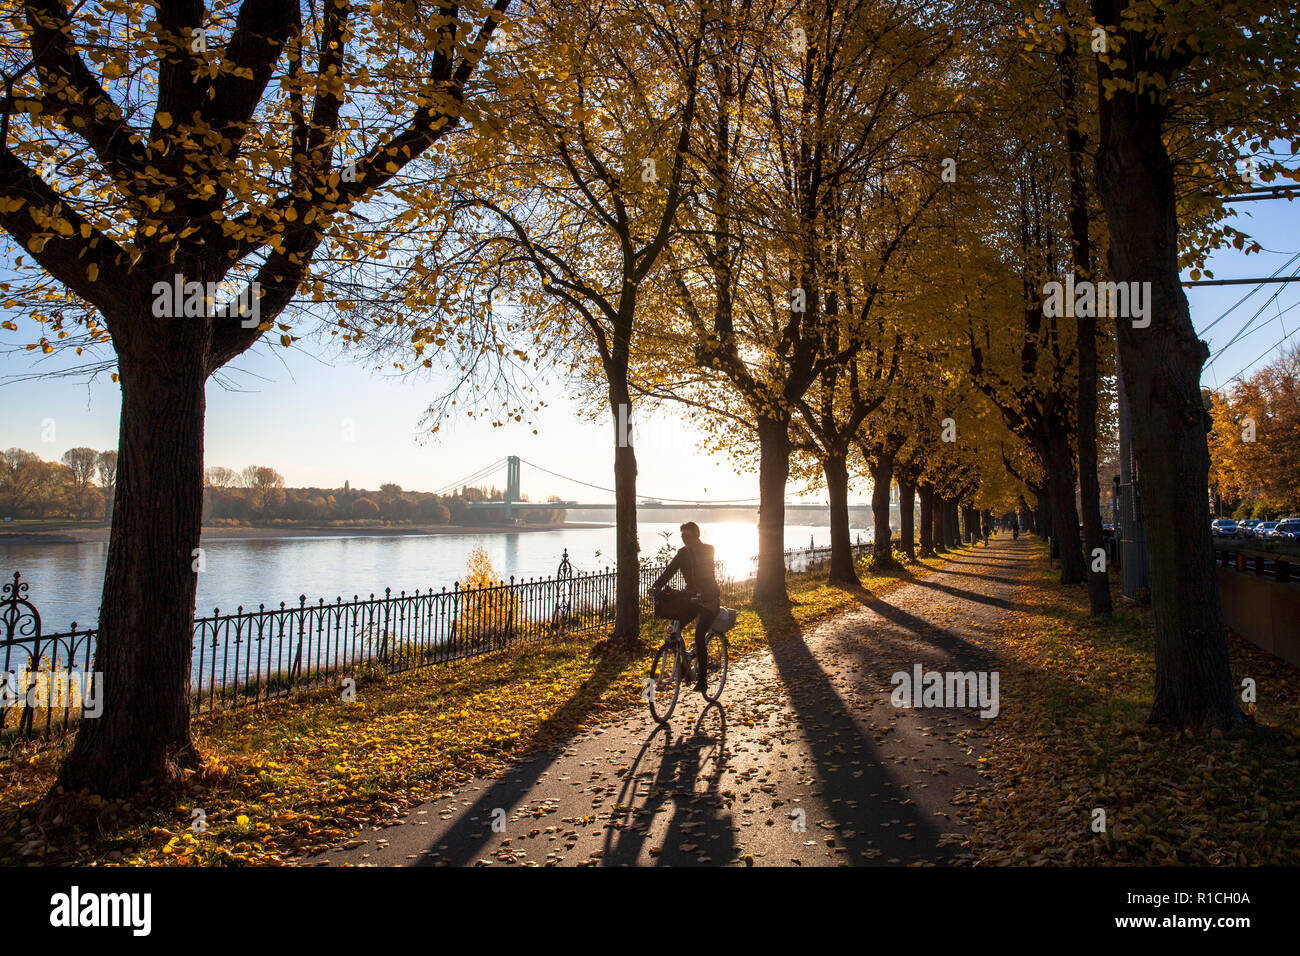 bicycle and pedestrian lane on the street Oberlaender Ufer in the district Marienburg, in the background the Rodenkirchener bridge, Cologne, Germany.  Stock Photo